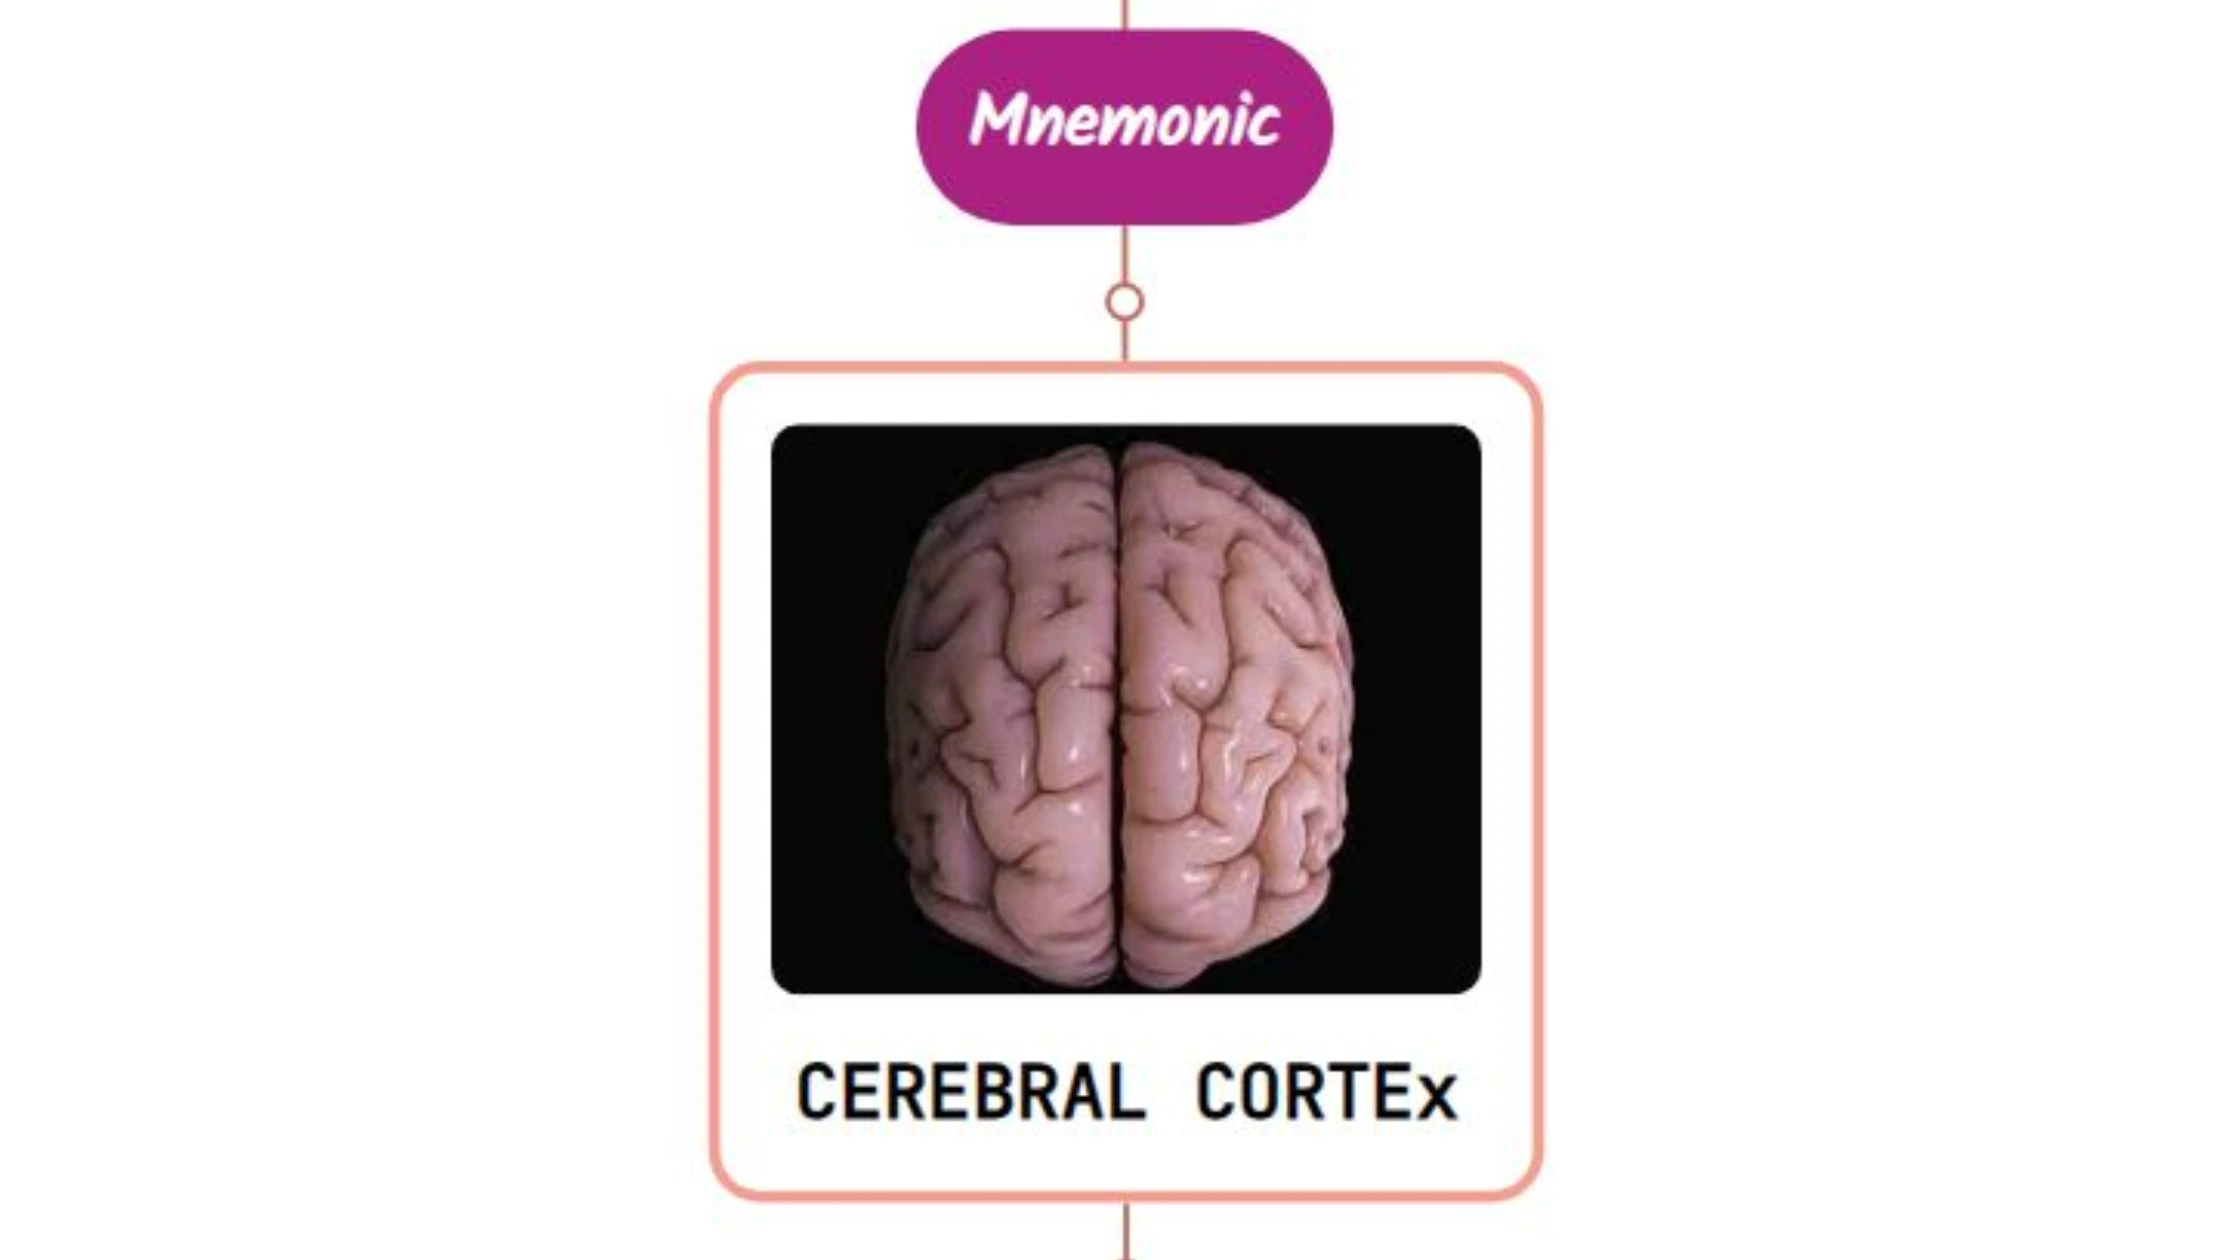 You are currently viewing Introduction to Cerebral Cortex Mnemonic